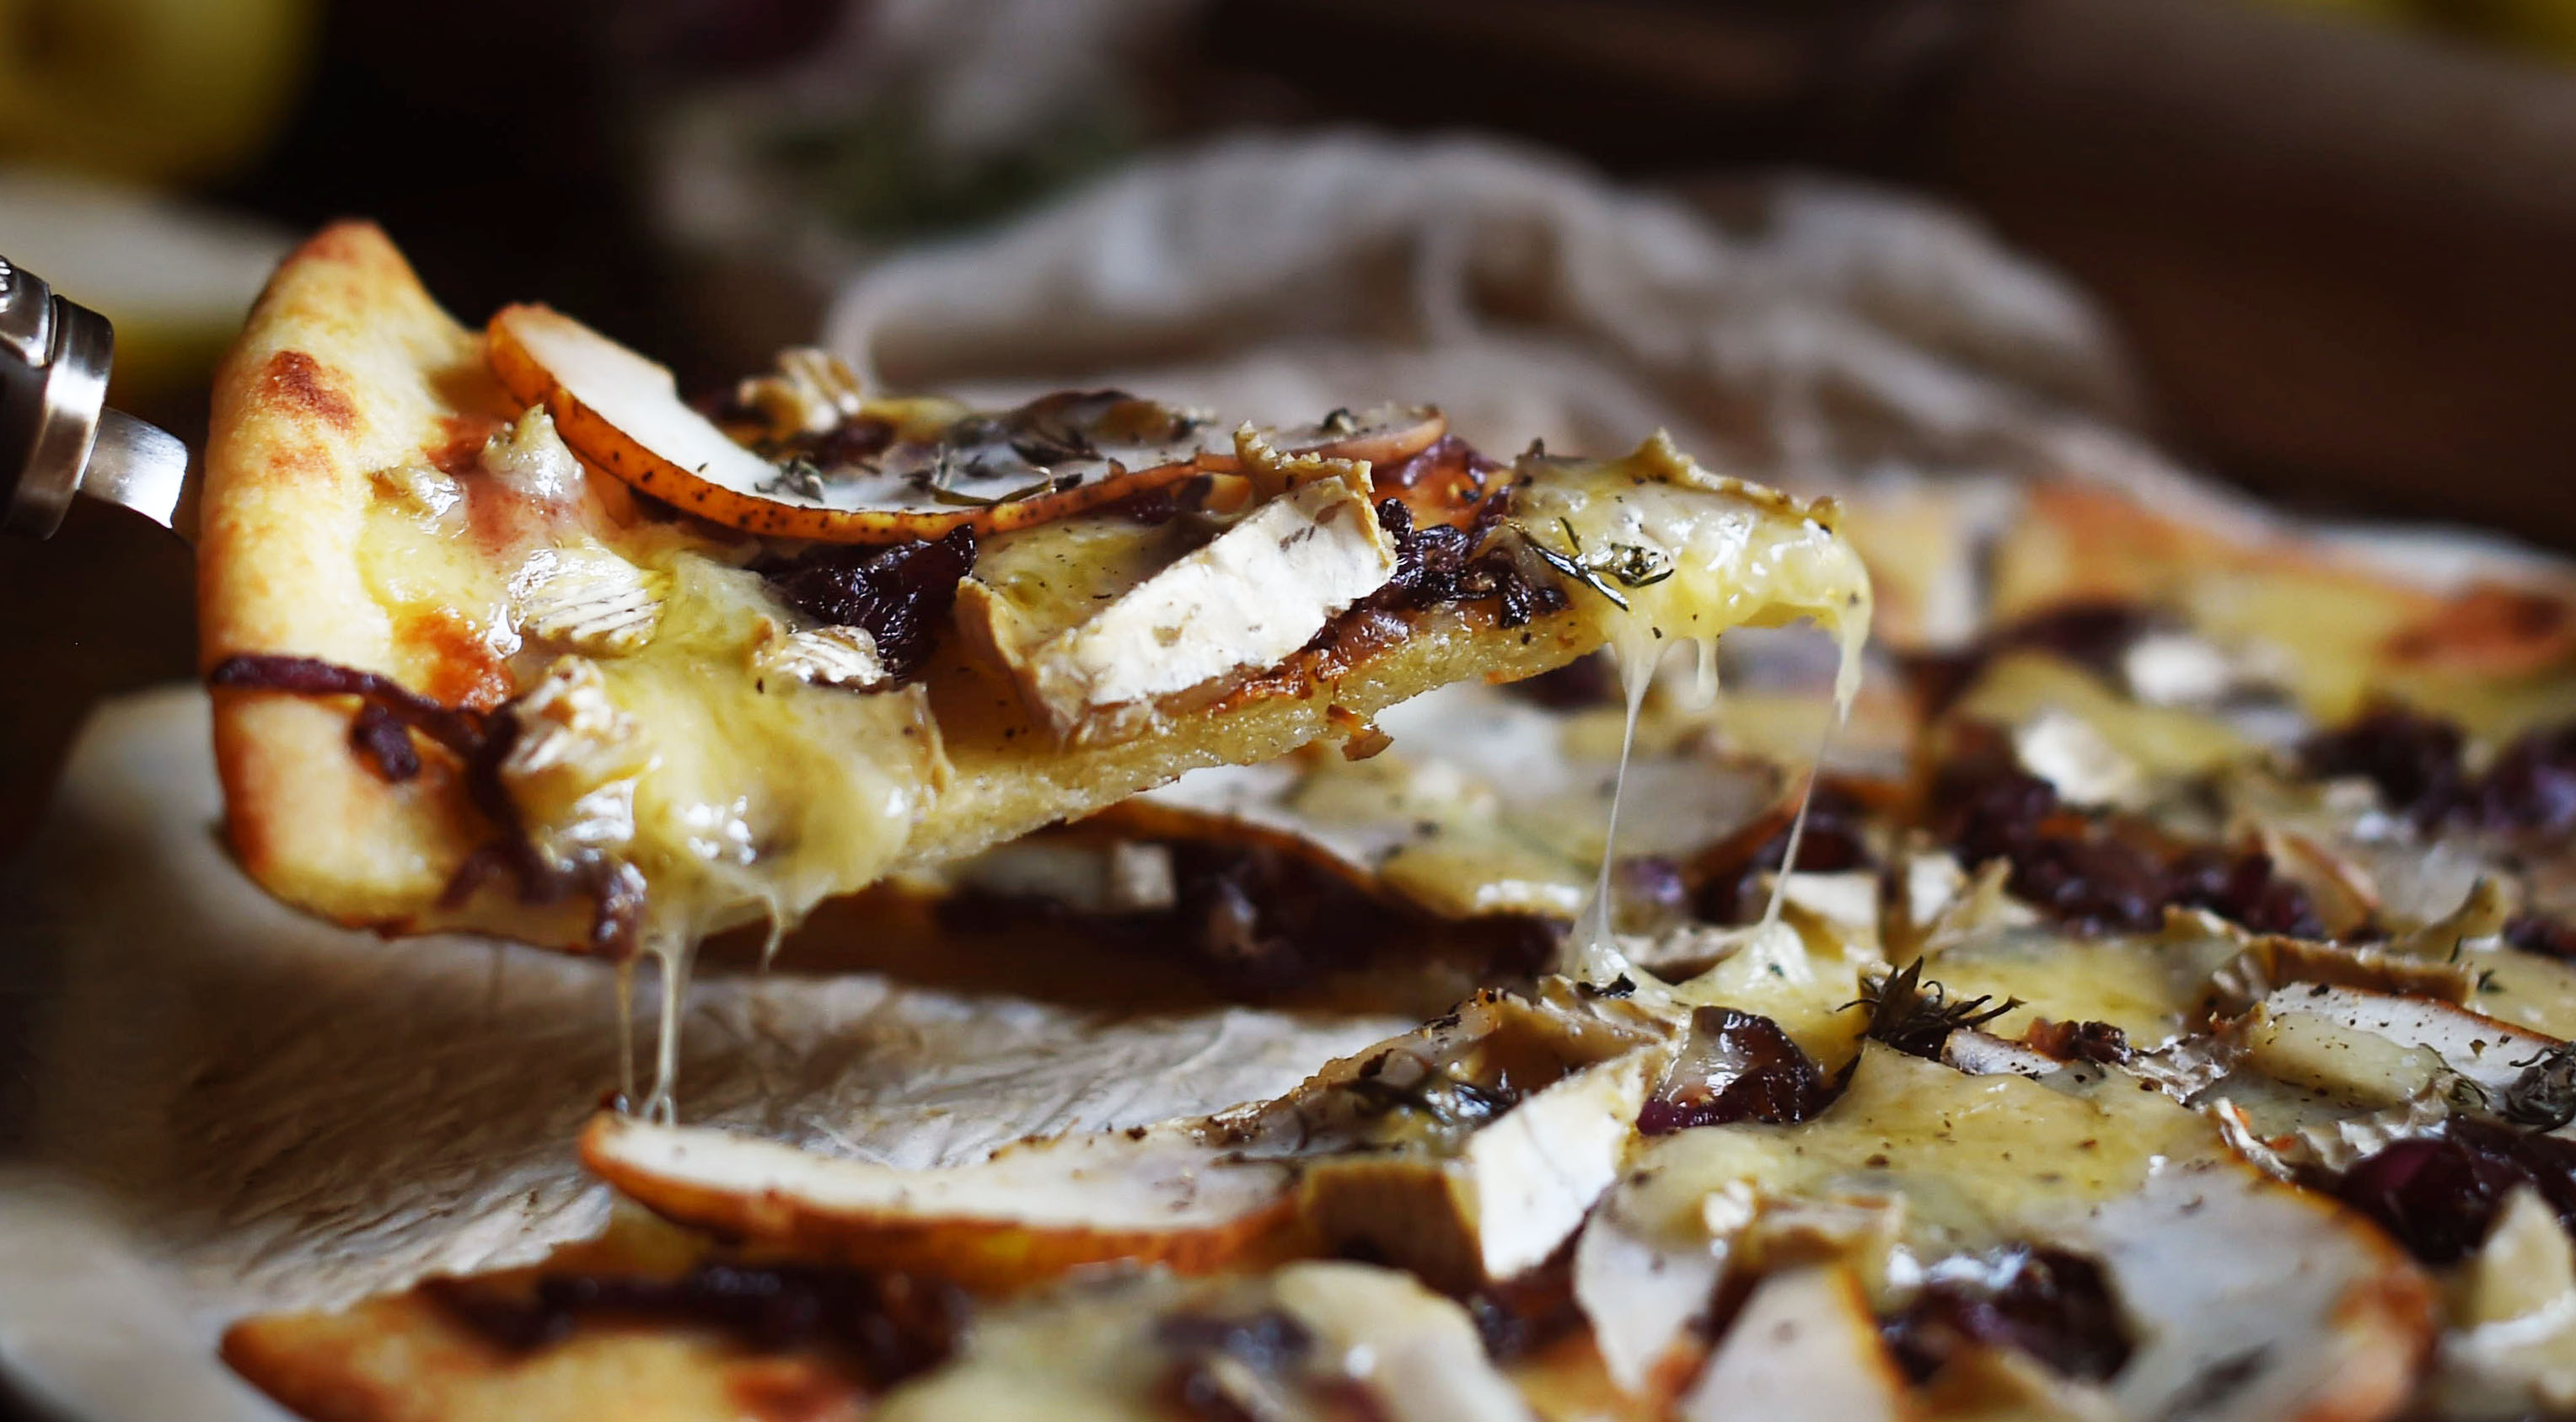 Low-Carb Caramelized Onion, Pear and Brie Flatbread